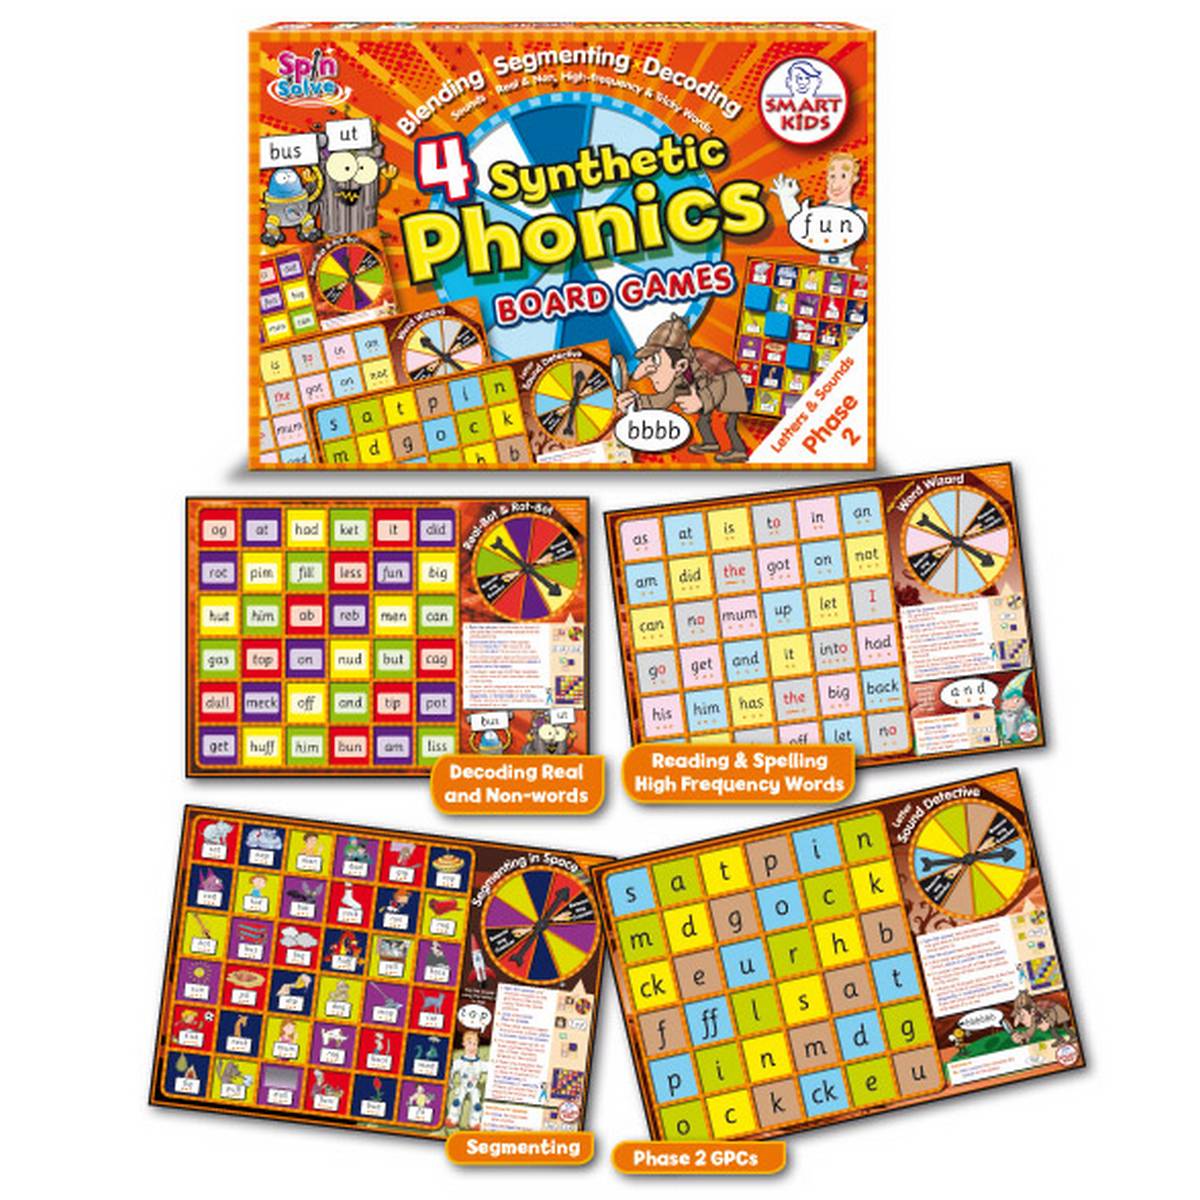 Synthetic Phonics Boards Games Age 3-7 Set of 4